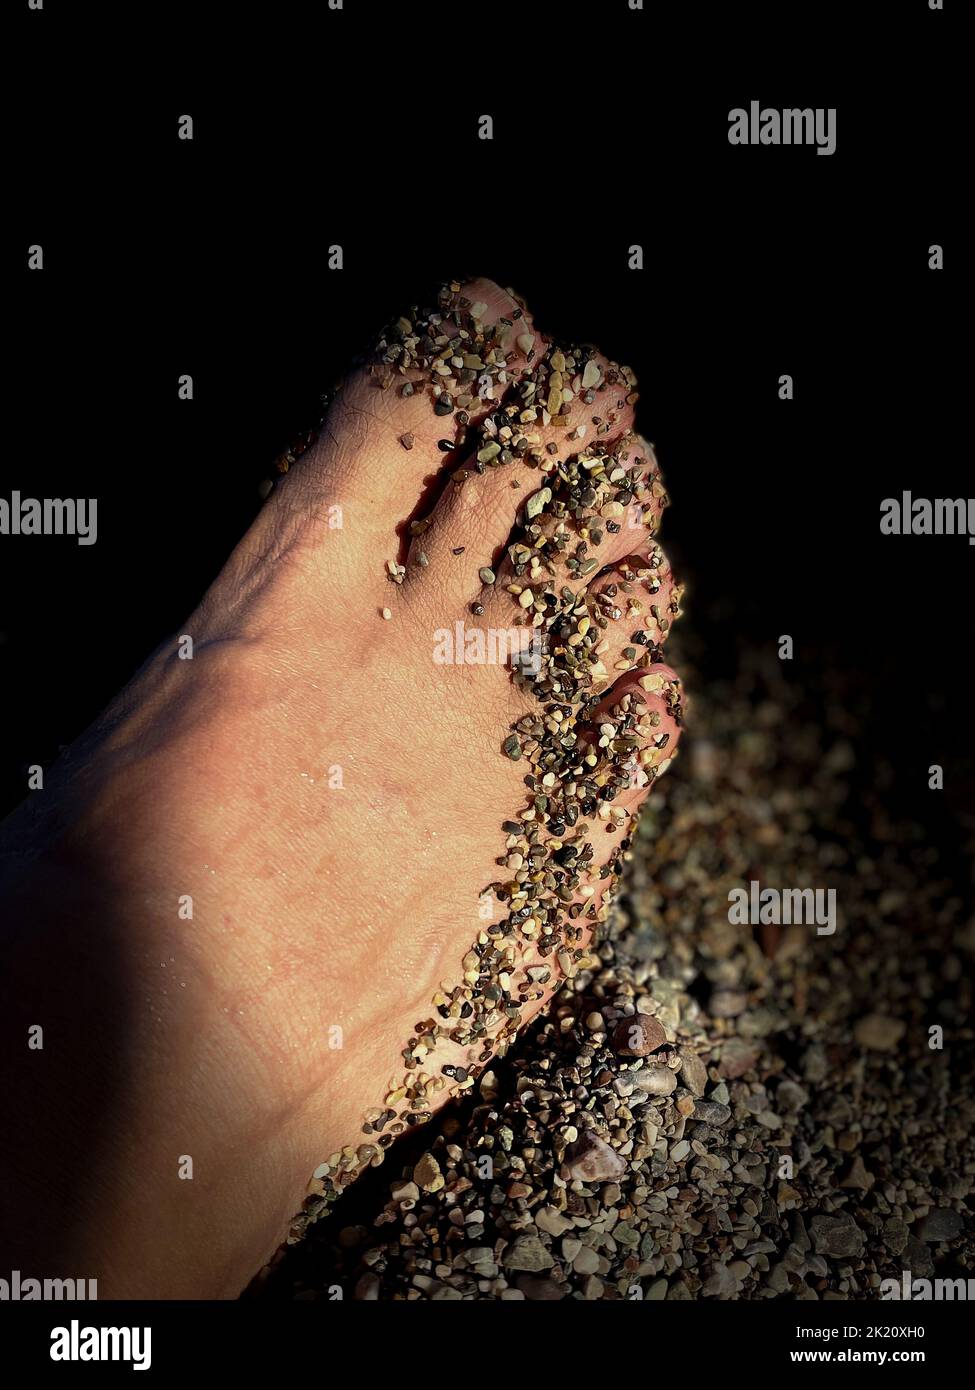 A foot covered in sand by the sea. Stock Photo